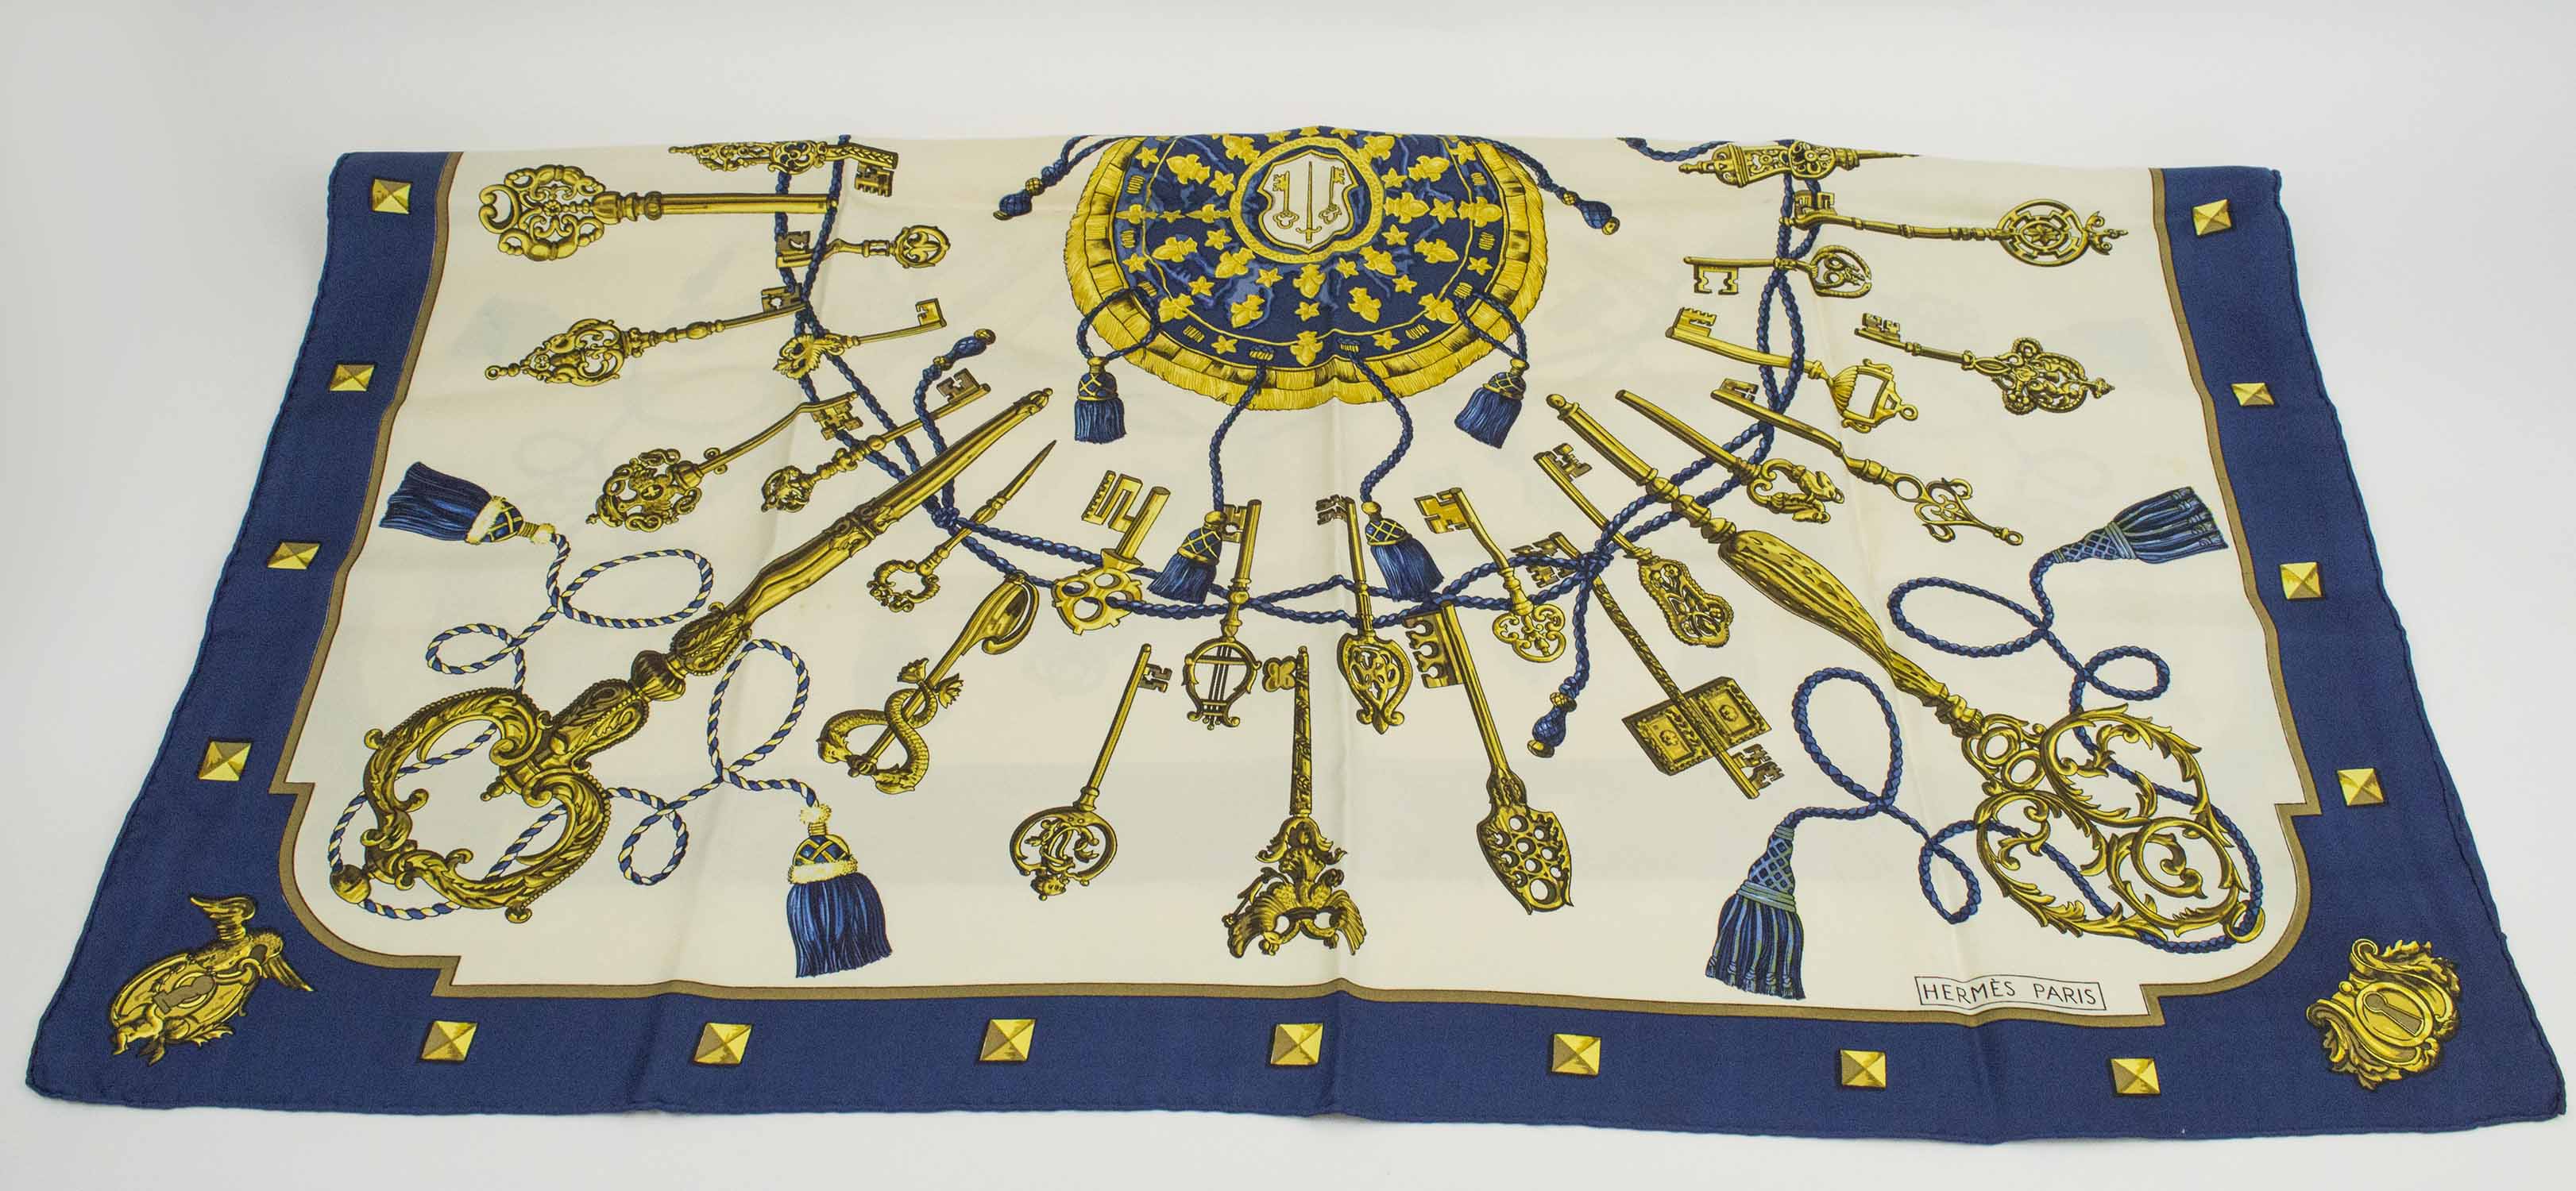 HERMÈS SCARF, 'Les clefs' of 'The keys', by Caty Latham, blue and gold, - Image 2 of 4